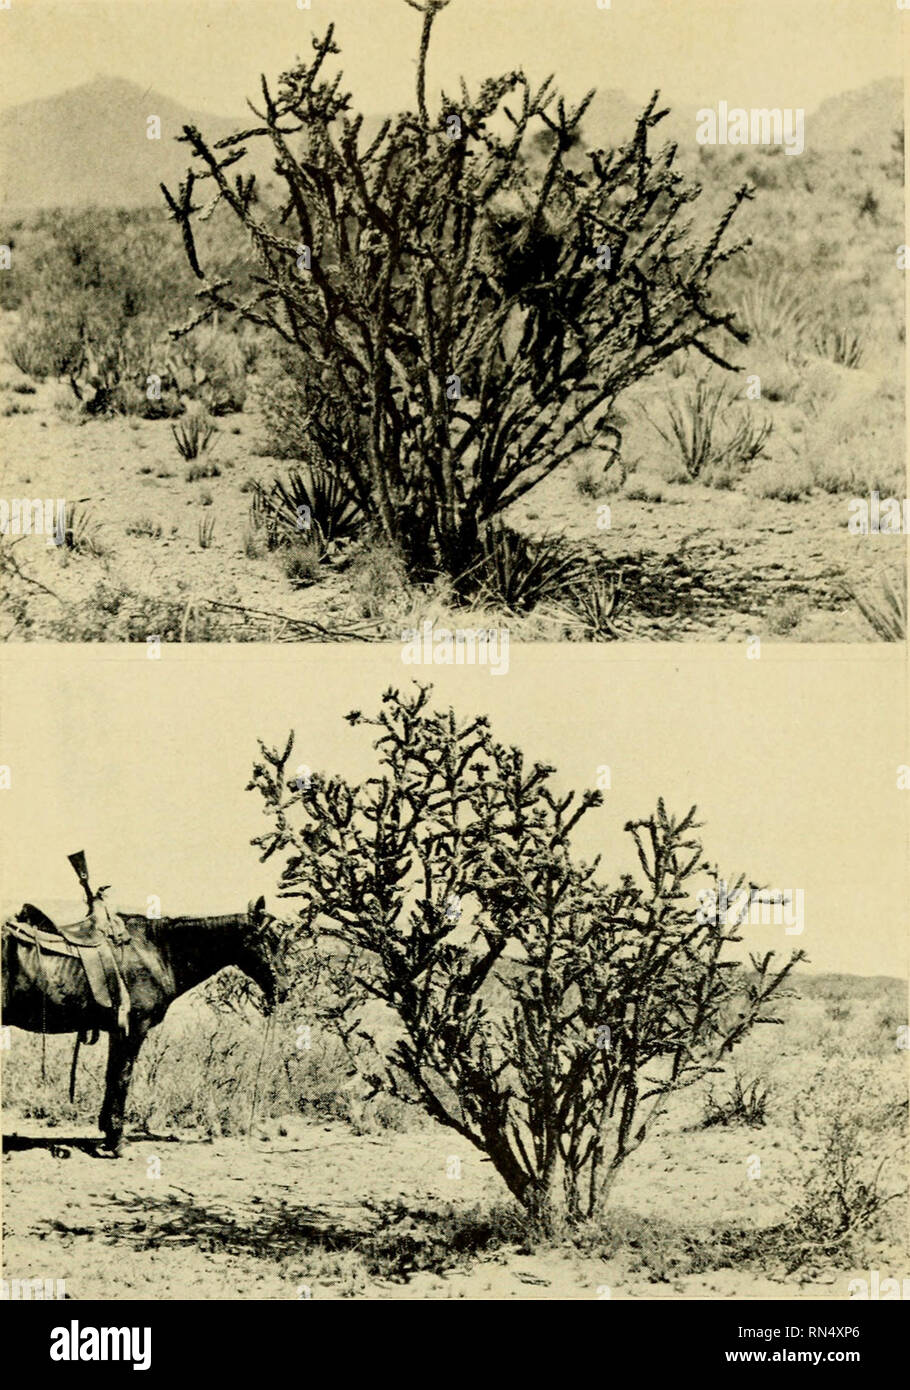 . Animal life of the Carlsbad cavern. Zoology -- New Mexico; Botany -- New Mexico; Cave animals; Botany -- New Mexico; Zoology -- New Mexico; Carlsbad Caverns (N. M. ). i^. • • VMM- ?H Upper: Fig. 52. Nest of the Cactus Wren in Cactus Bush The thick-walled nest of securely woven plant fibers lined with feathers and opening through a neck at one side furnishes a warm sleeping room for winter as well as a safe nest for the young in summer. Lower: Fig. 53. The Cane Cactus (Opuntia arborescens) in Fruit With nest of curved-billed thrasher safely hidden in the center of its spiny branches. 137. Ple Stock Photo